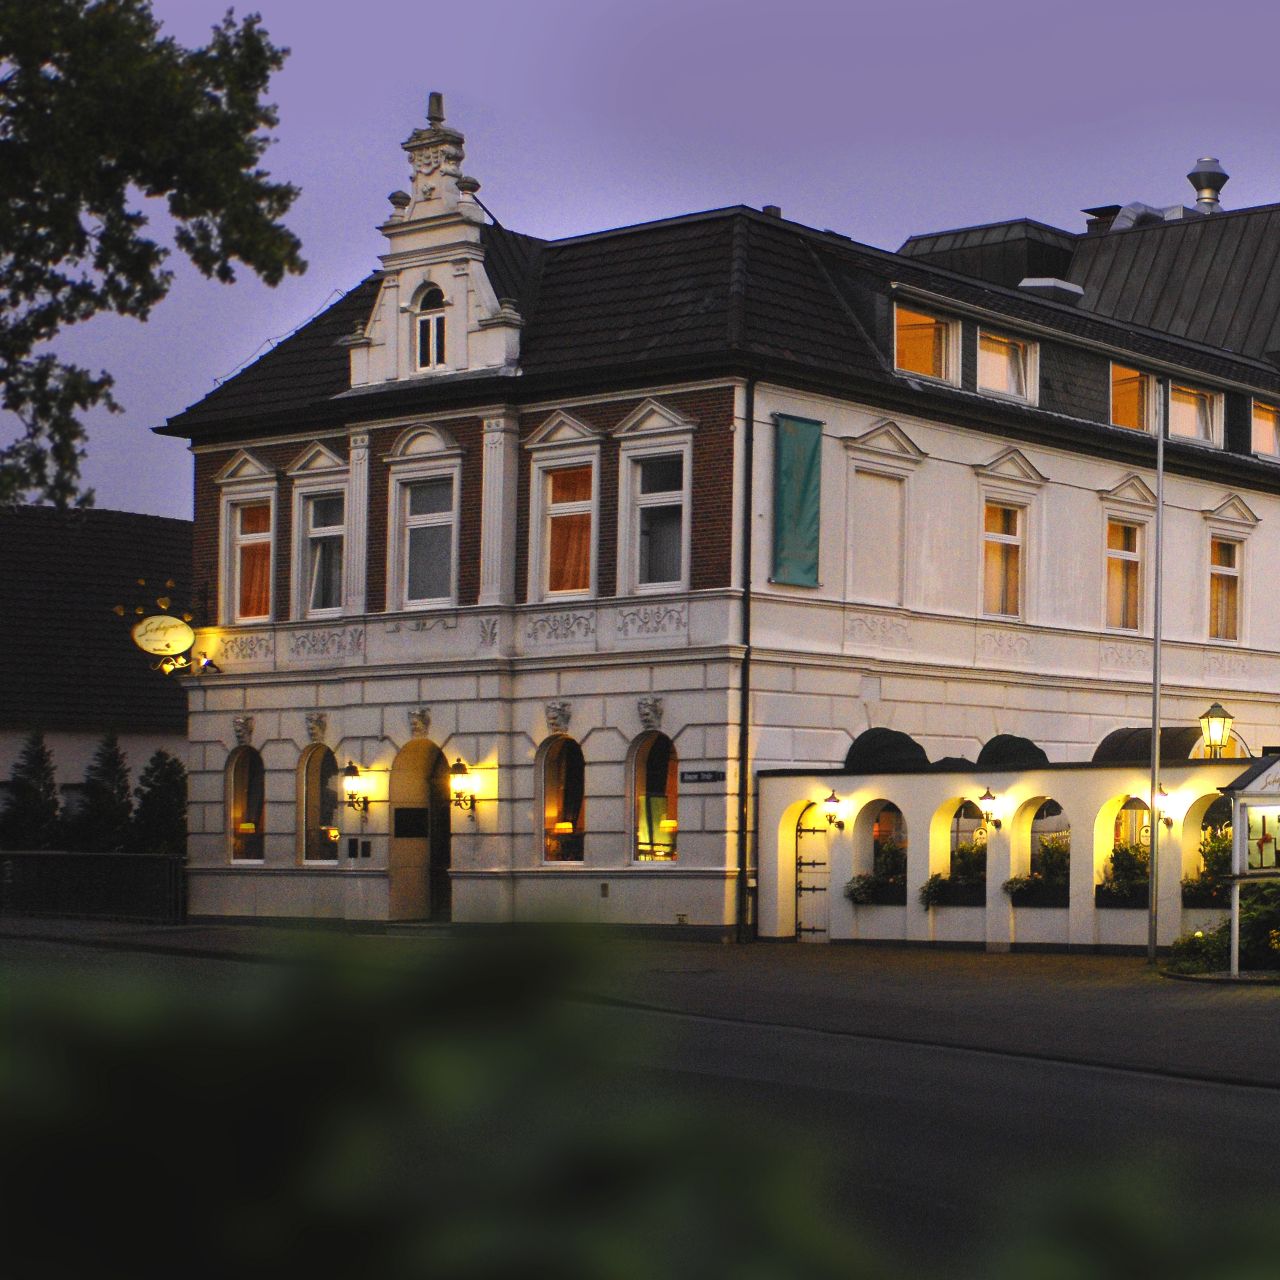 Hotel Schepers - Gronau - Great prices at HOTEL INFO